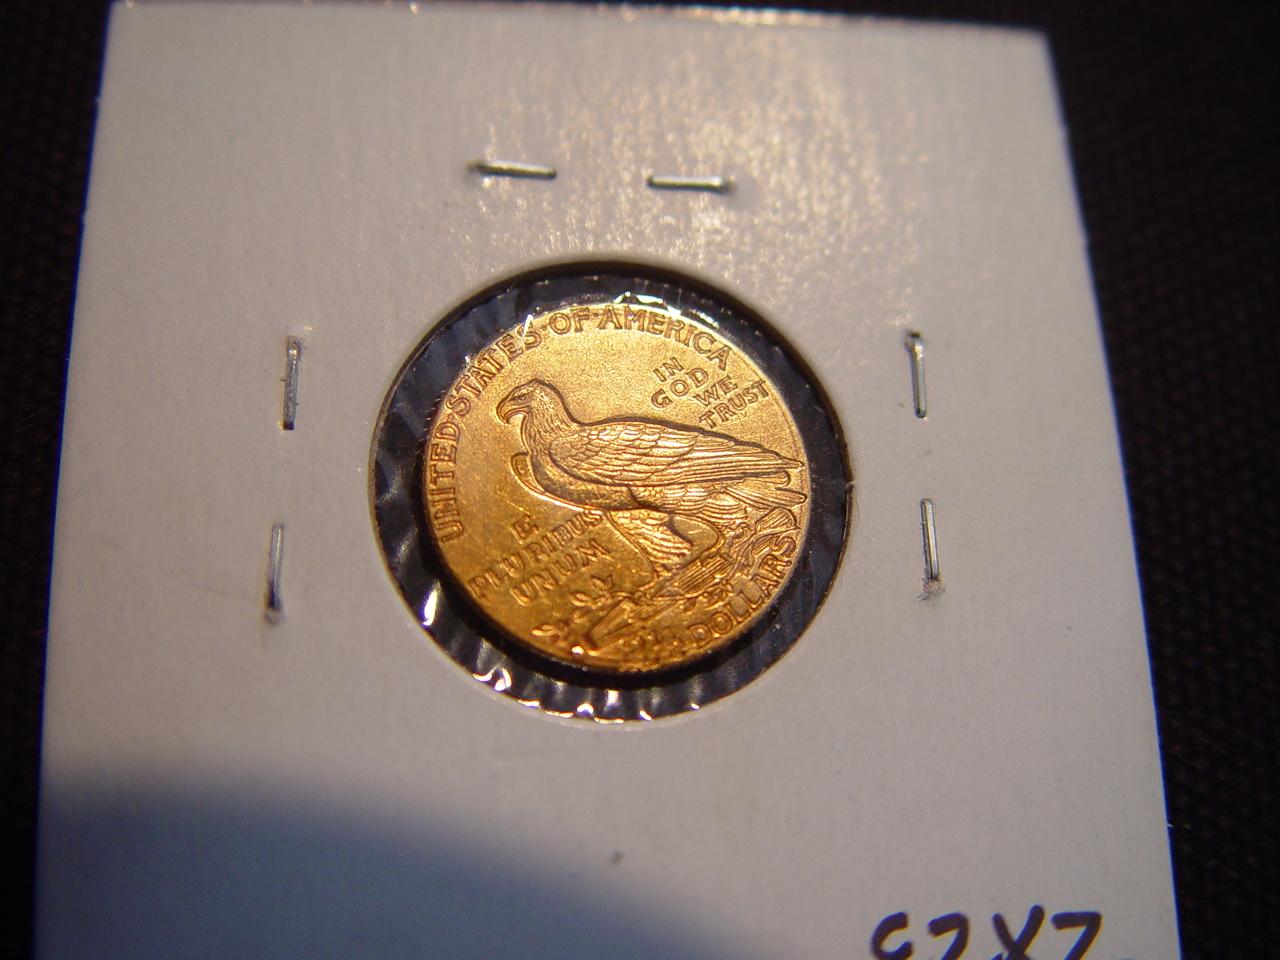 1914-D 2 1/2 Gold Indian XF